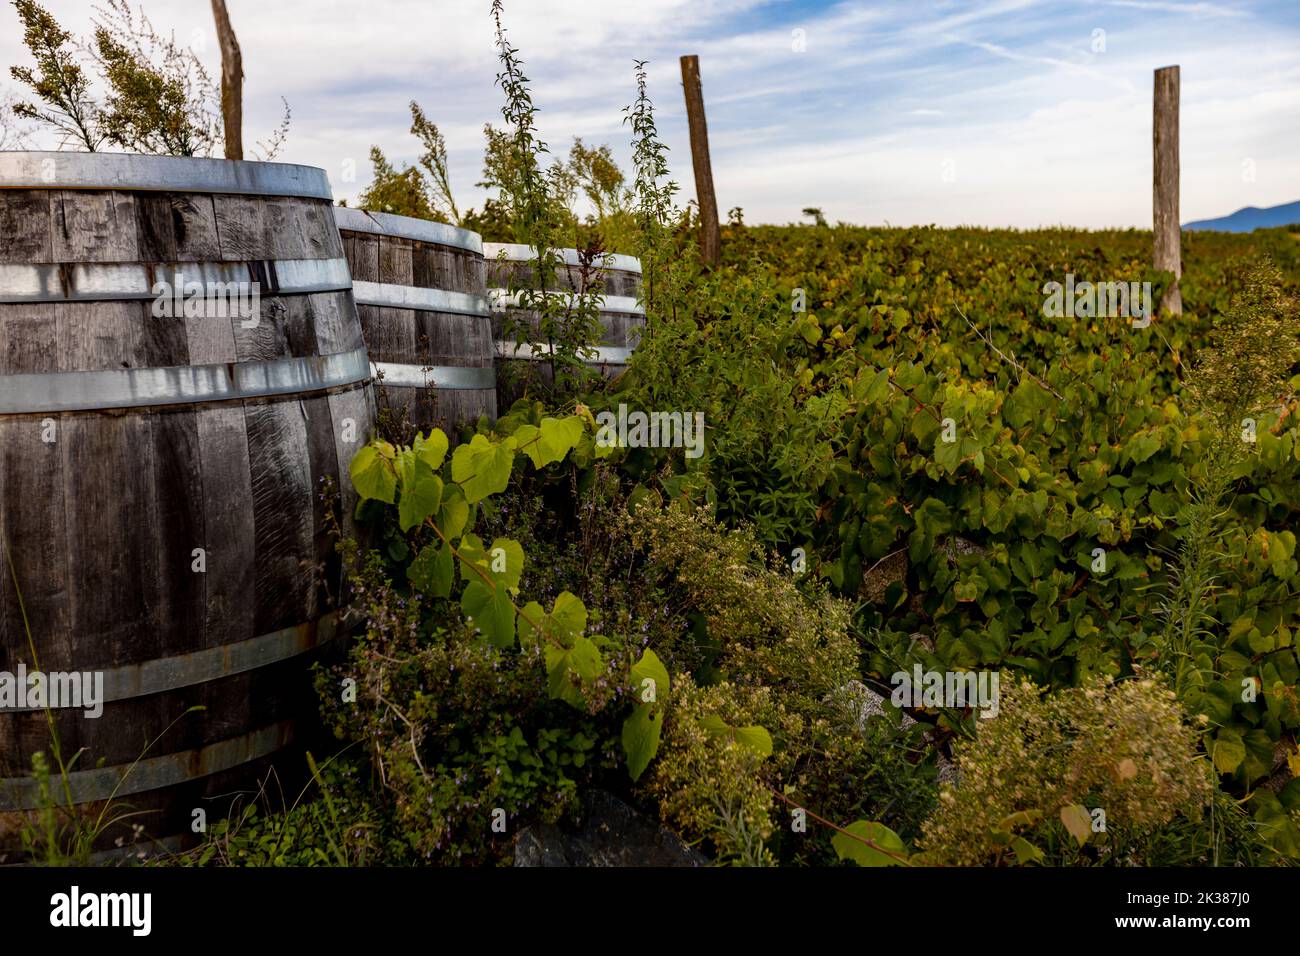 View at wooden wine barrels in the vineyarrd Stock Photo